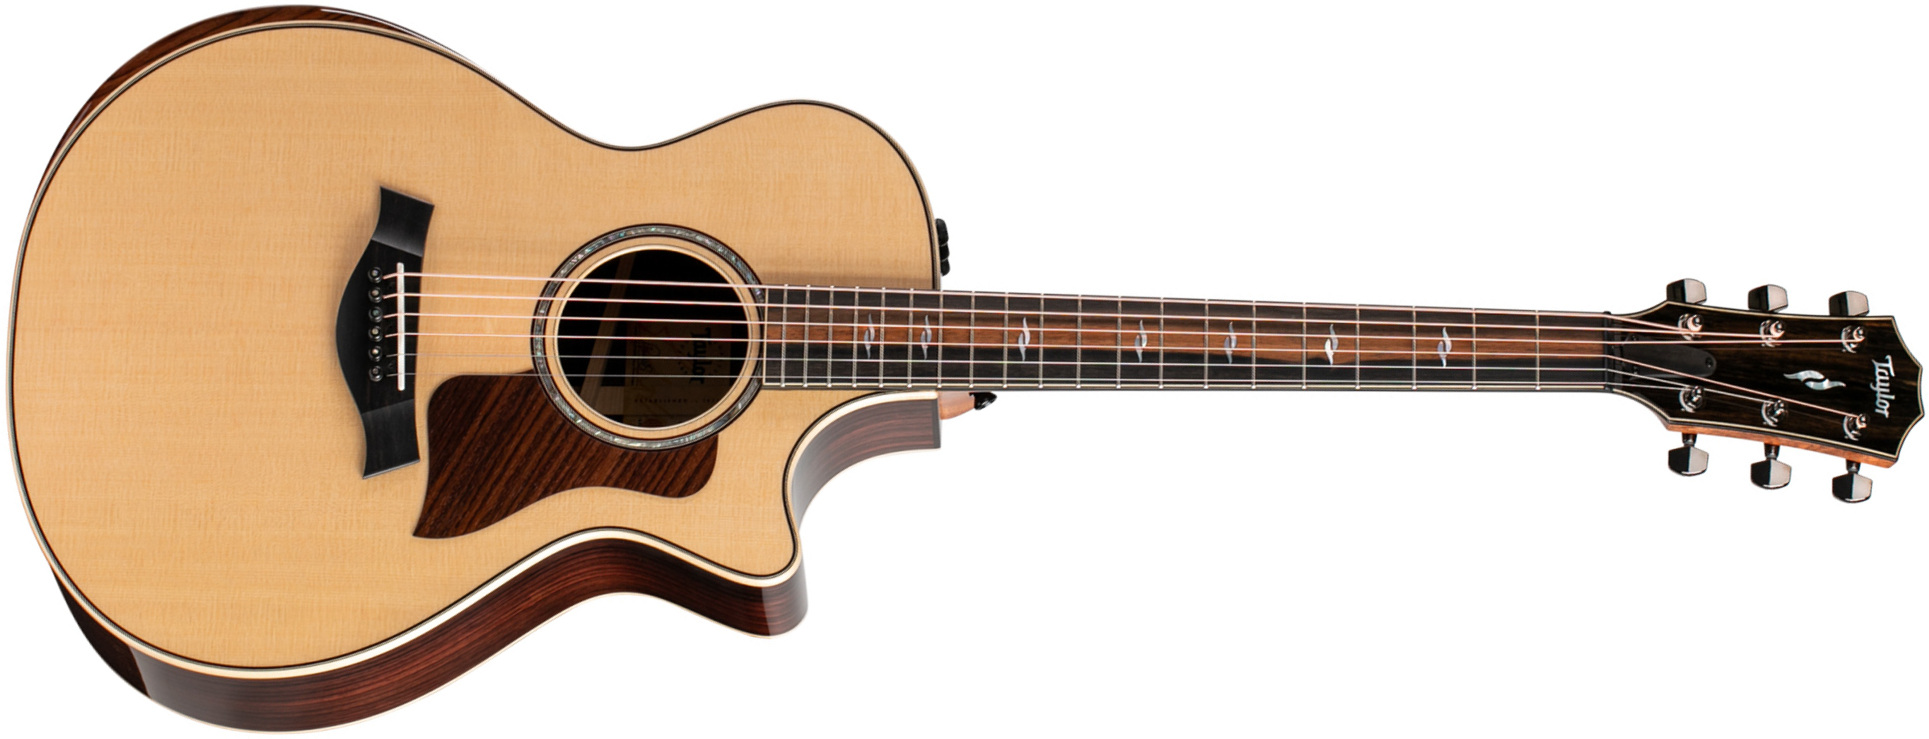 Taylor 812ce V-class Grand Concert Cw Epicea Palissandre Eb Es2 - Natural - Westerngitarre & electro - Main picture